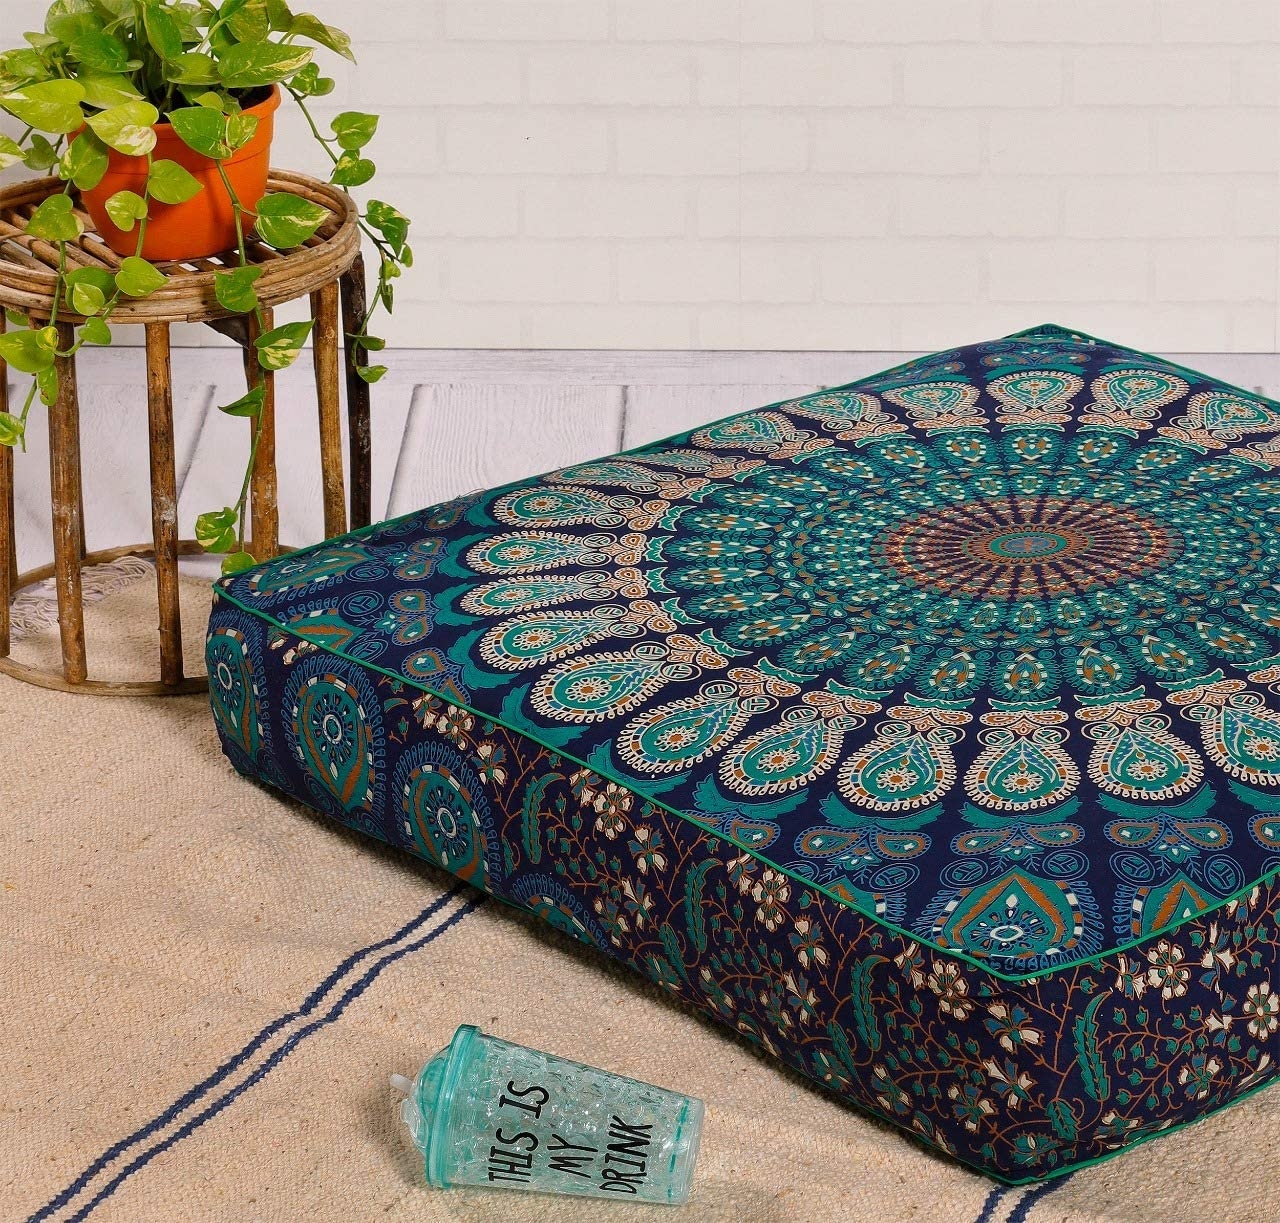 Popular Handicrafts Indian Hippie Mandala Floor Pillow Cover Square Ottoman Pouf Cover Daybed Oversized Cotton Cushion Cover with Heavy Duty Zipper Seating Ottoman Poufs Dog-Pets Bed 35" Tarqouish